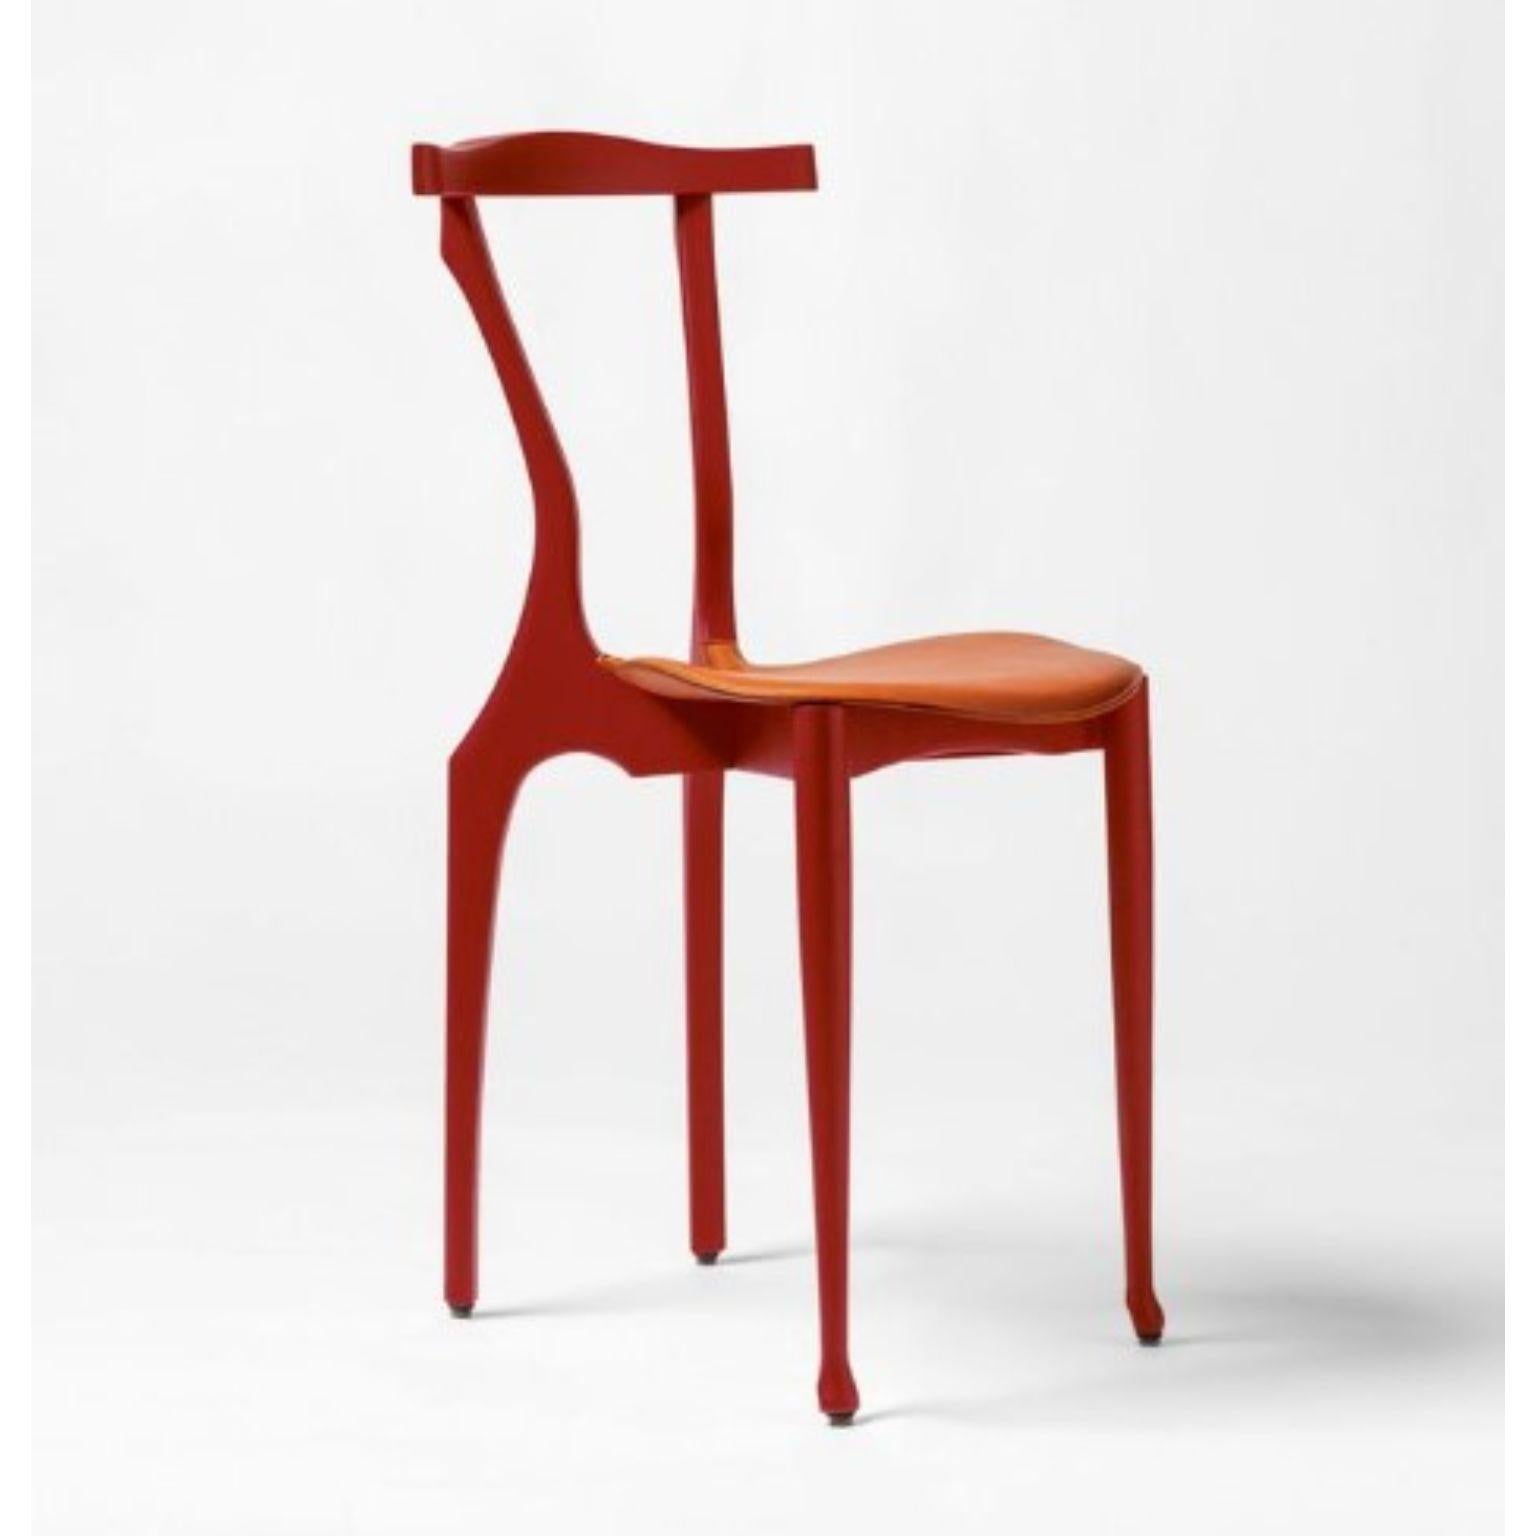 Modern Gaulinetta Natural Chair by Oscar Tusquets For Sale